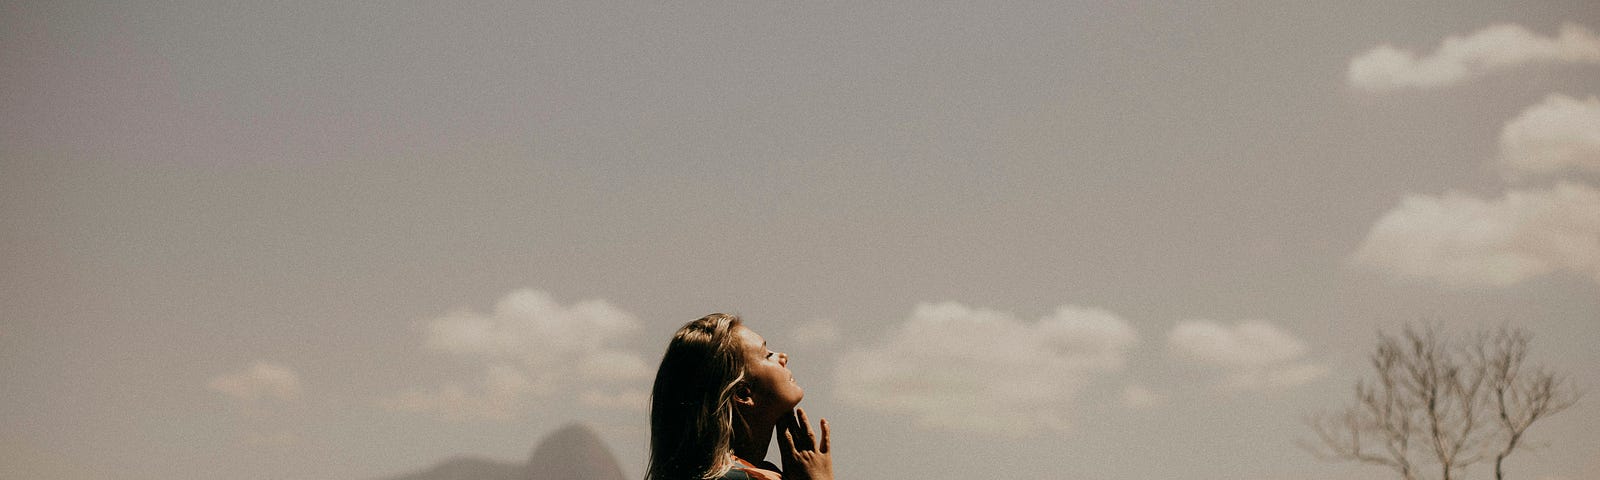 woman standing outside, facing the sky and mountains